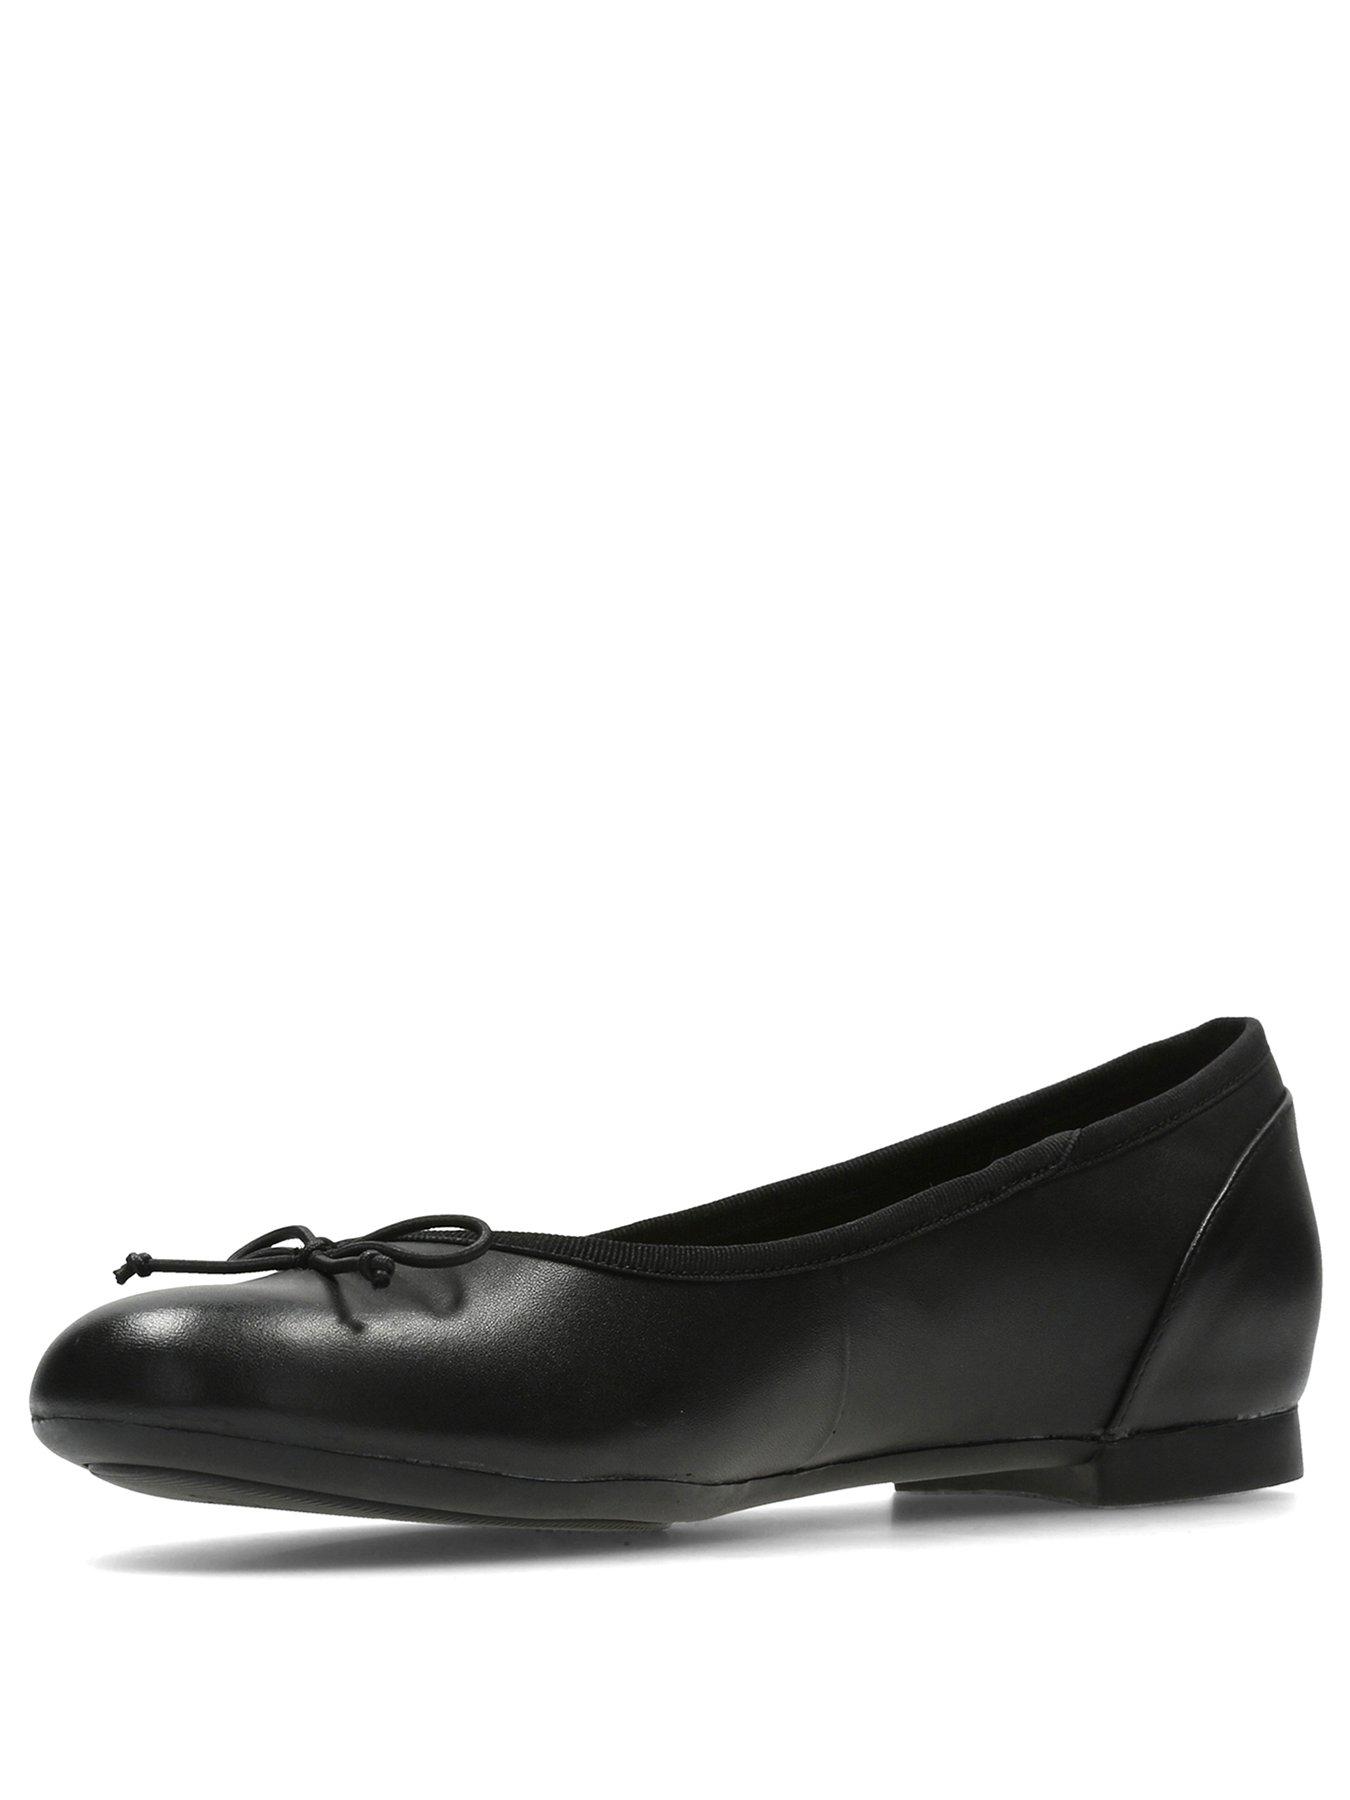 clarks wide fitting shoes ladies